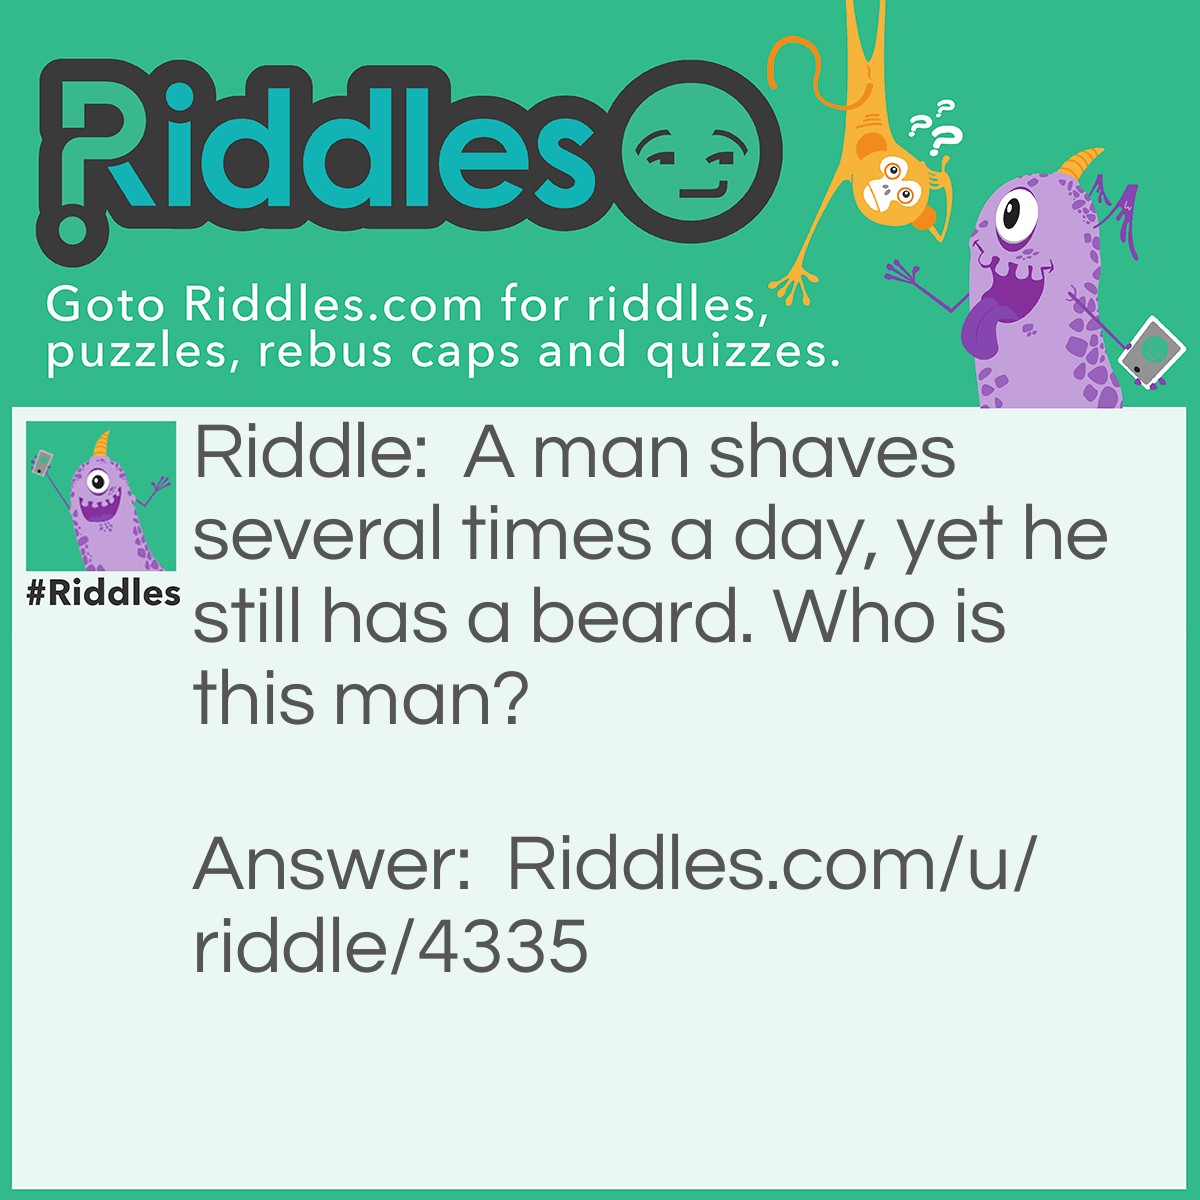 Riddle: A man shaves several times a day, yet he still has a beard. Who is this man? Answer: A barber.